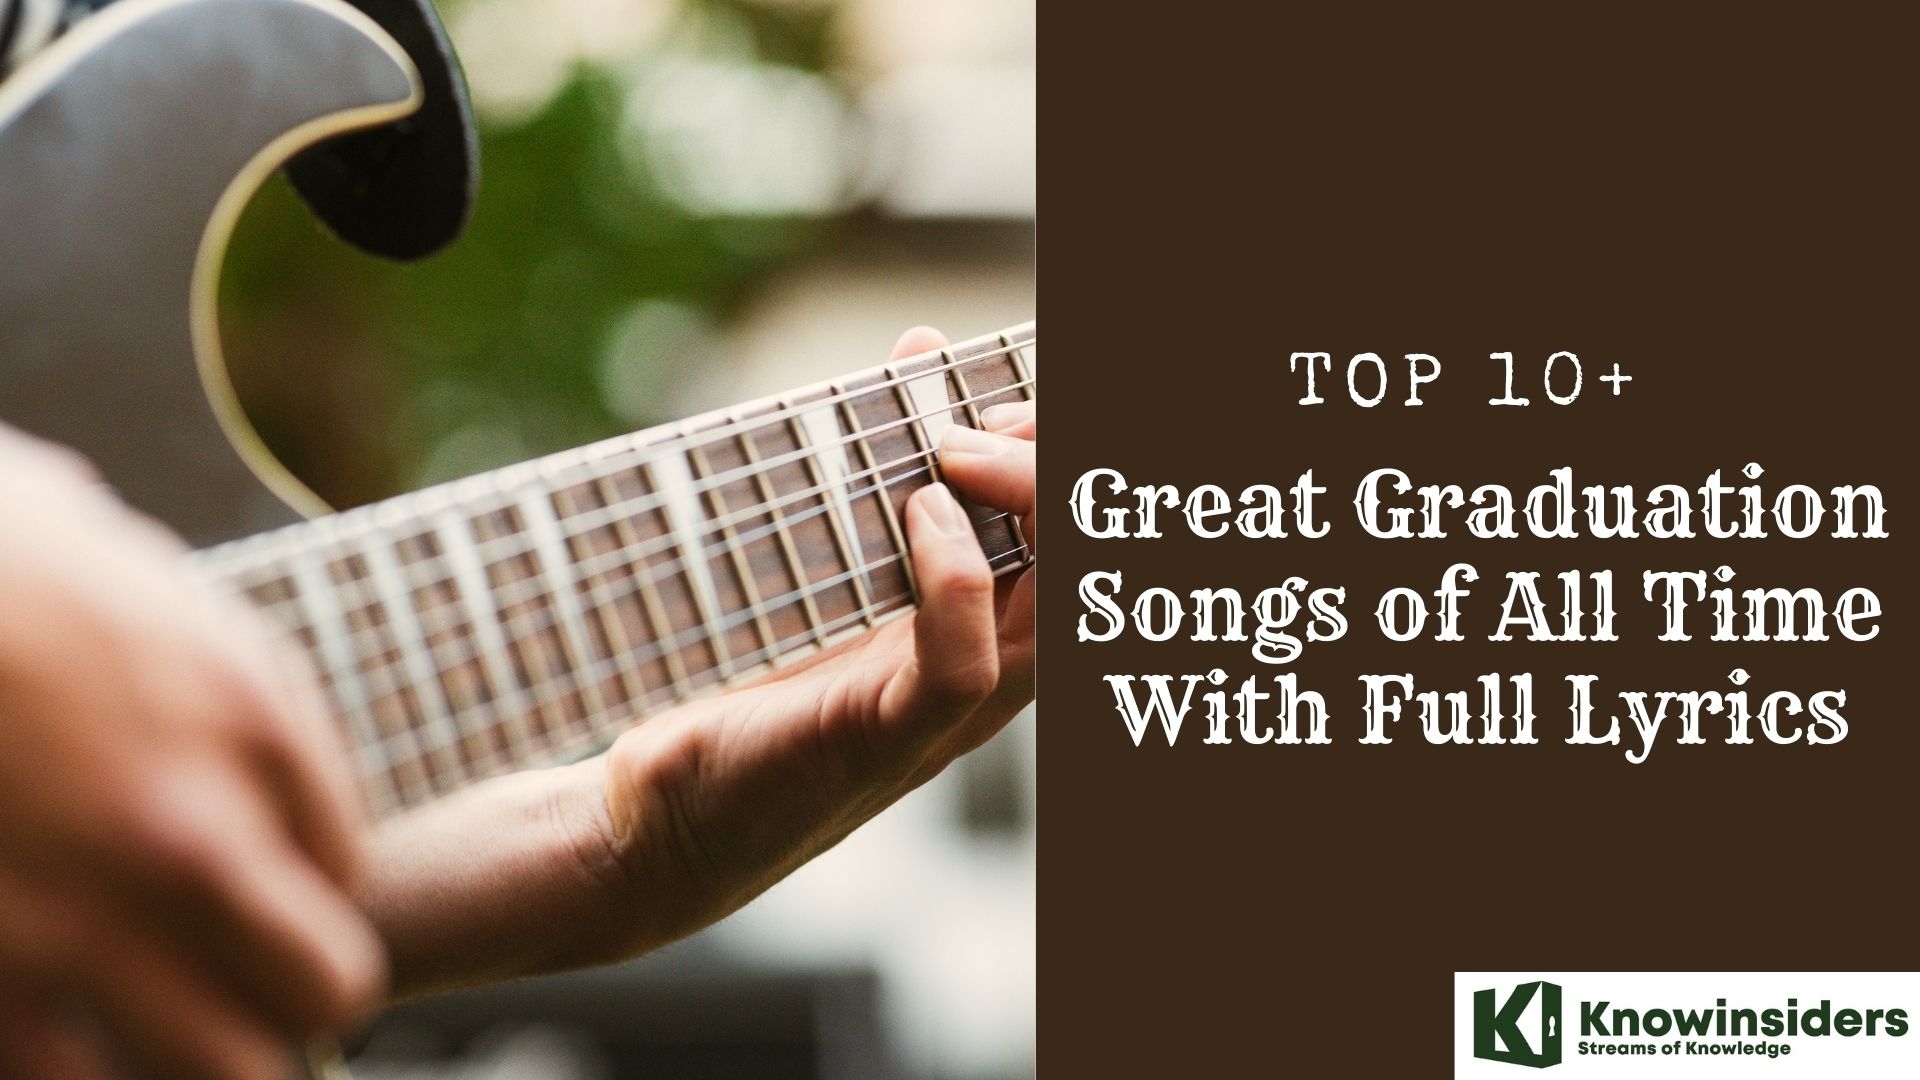 Top 10 Great Graduation Songs of All Time With Full Lyrics